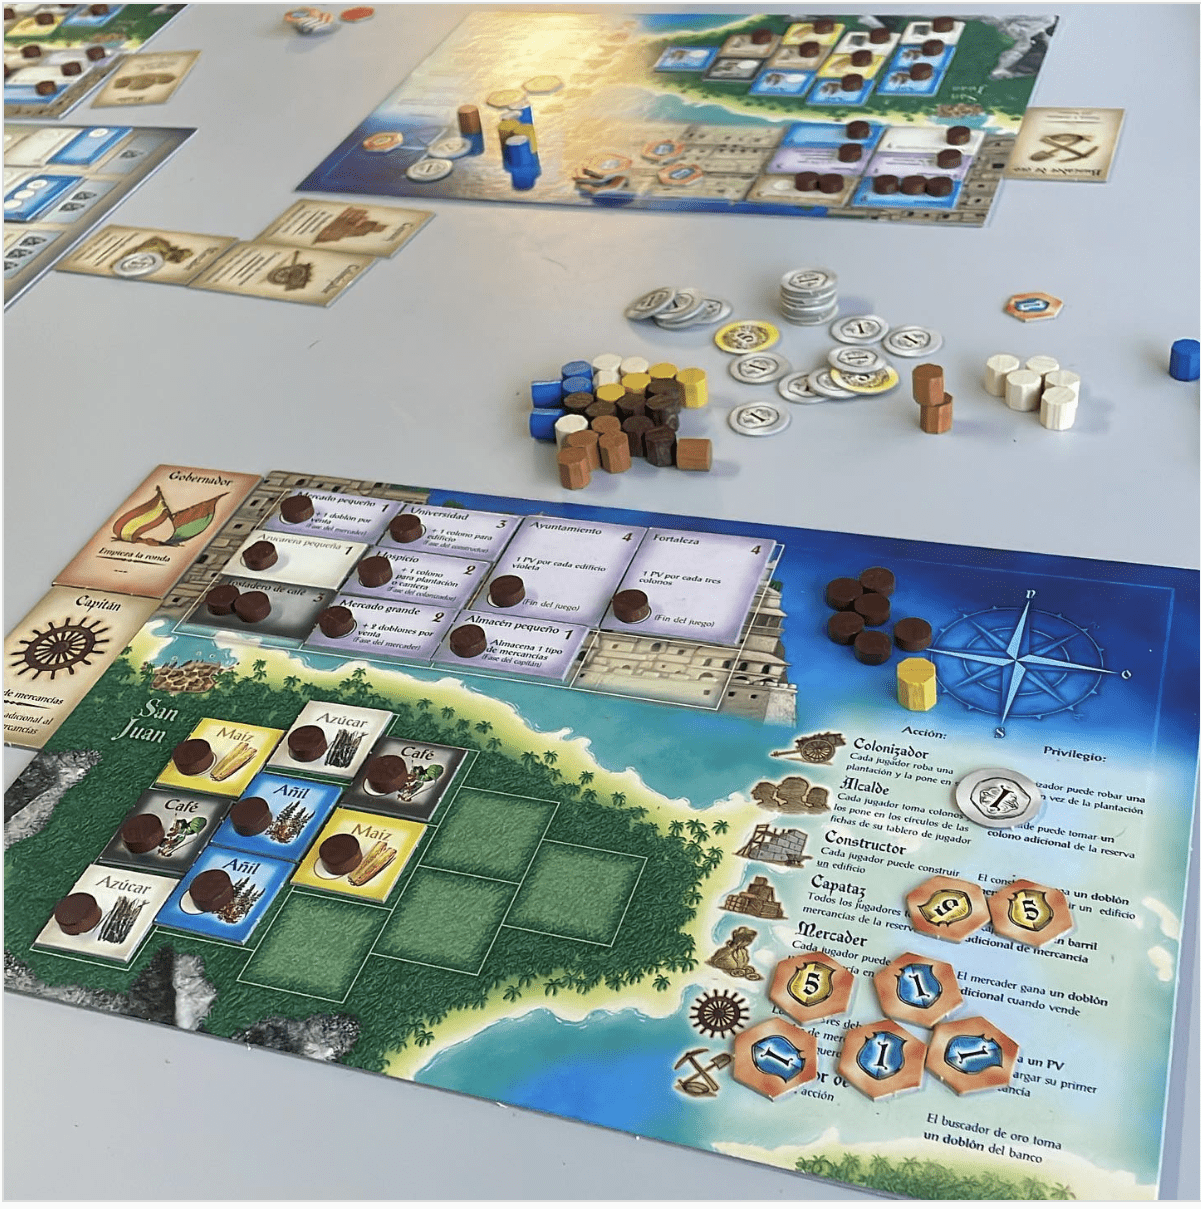 Puerto Rico board game being played on a table